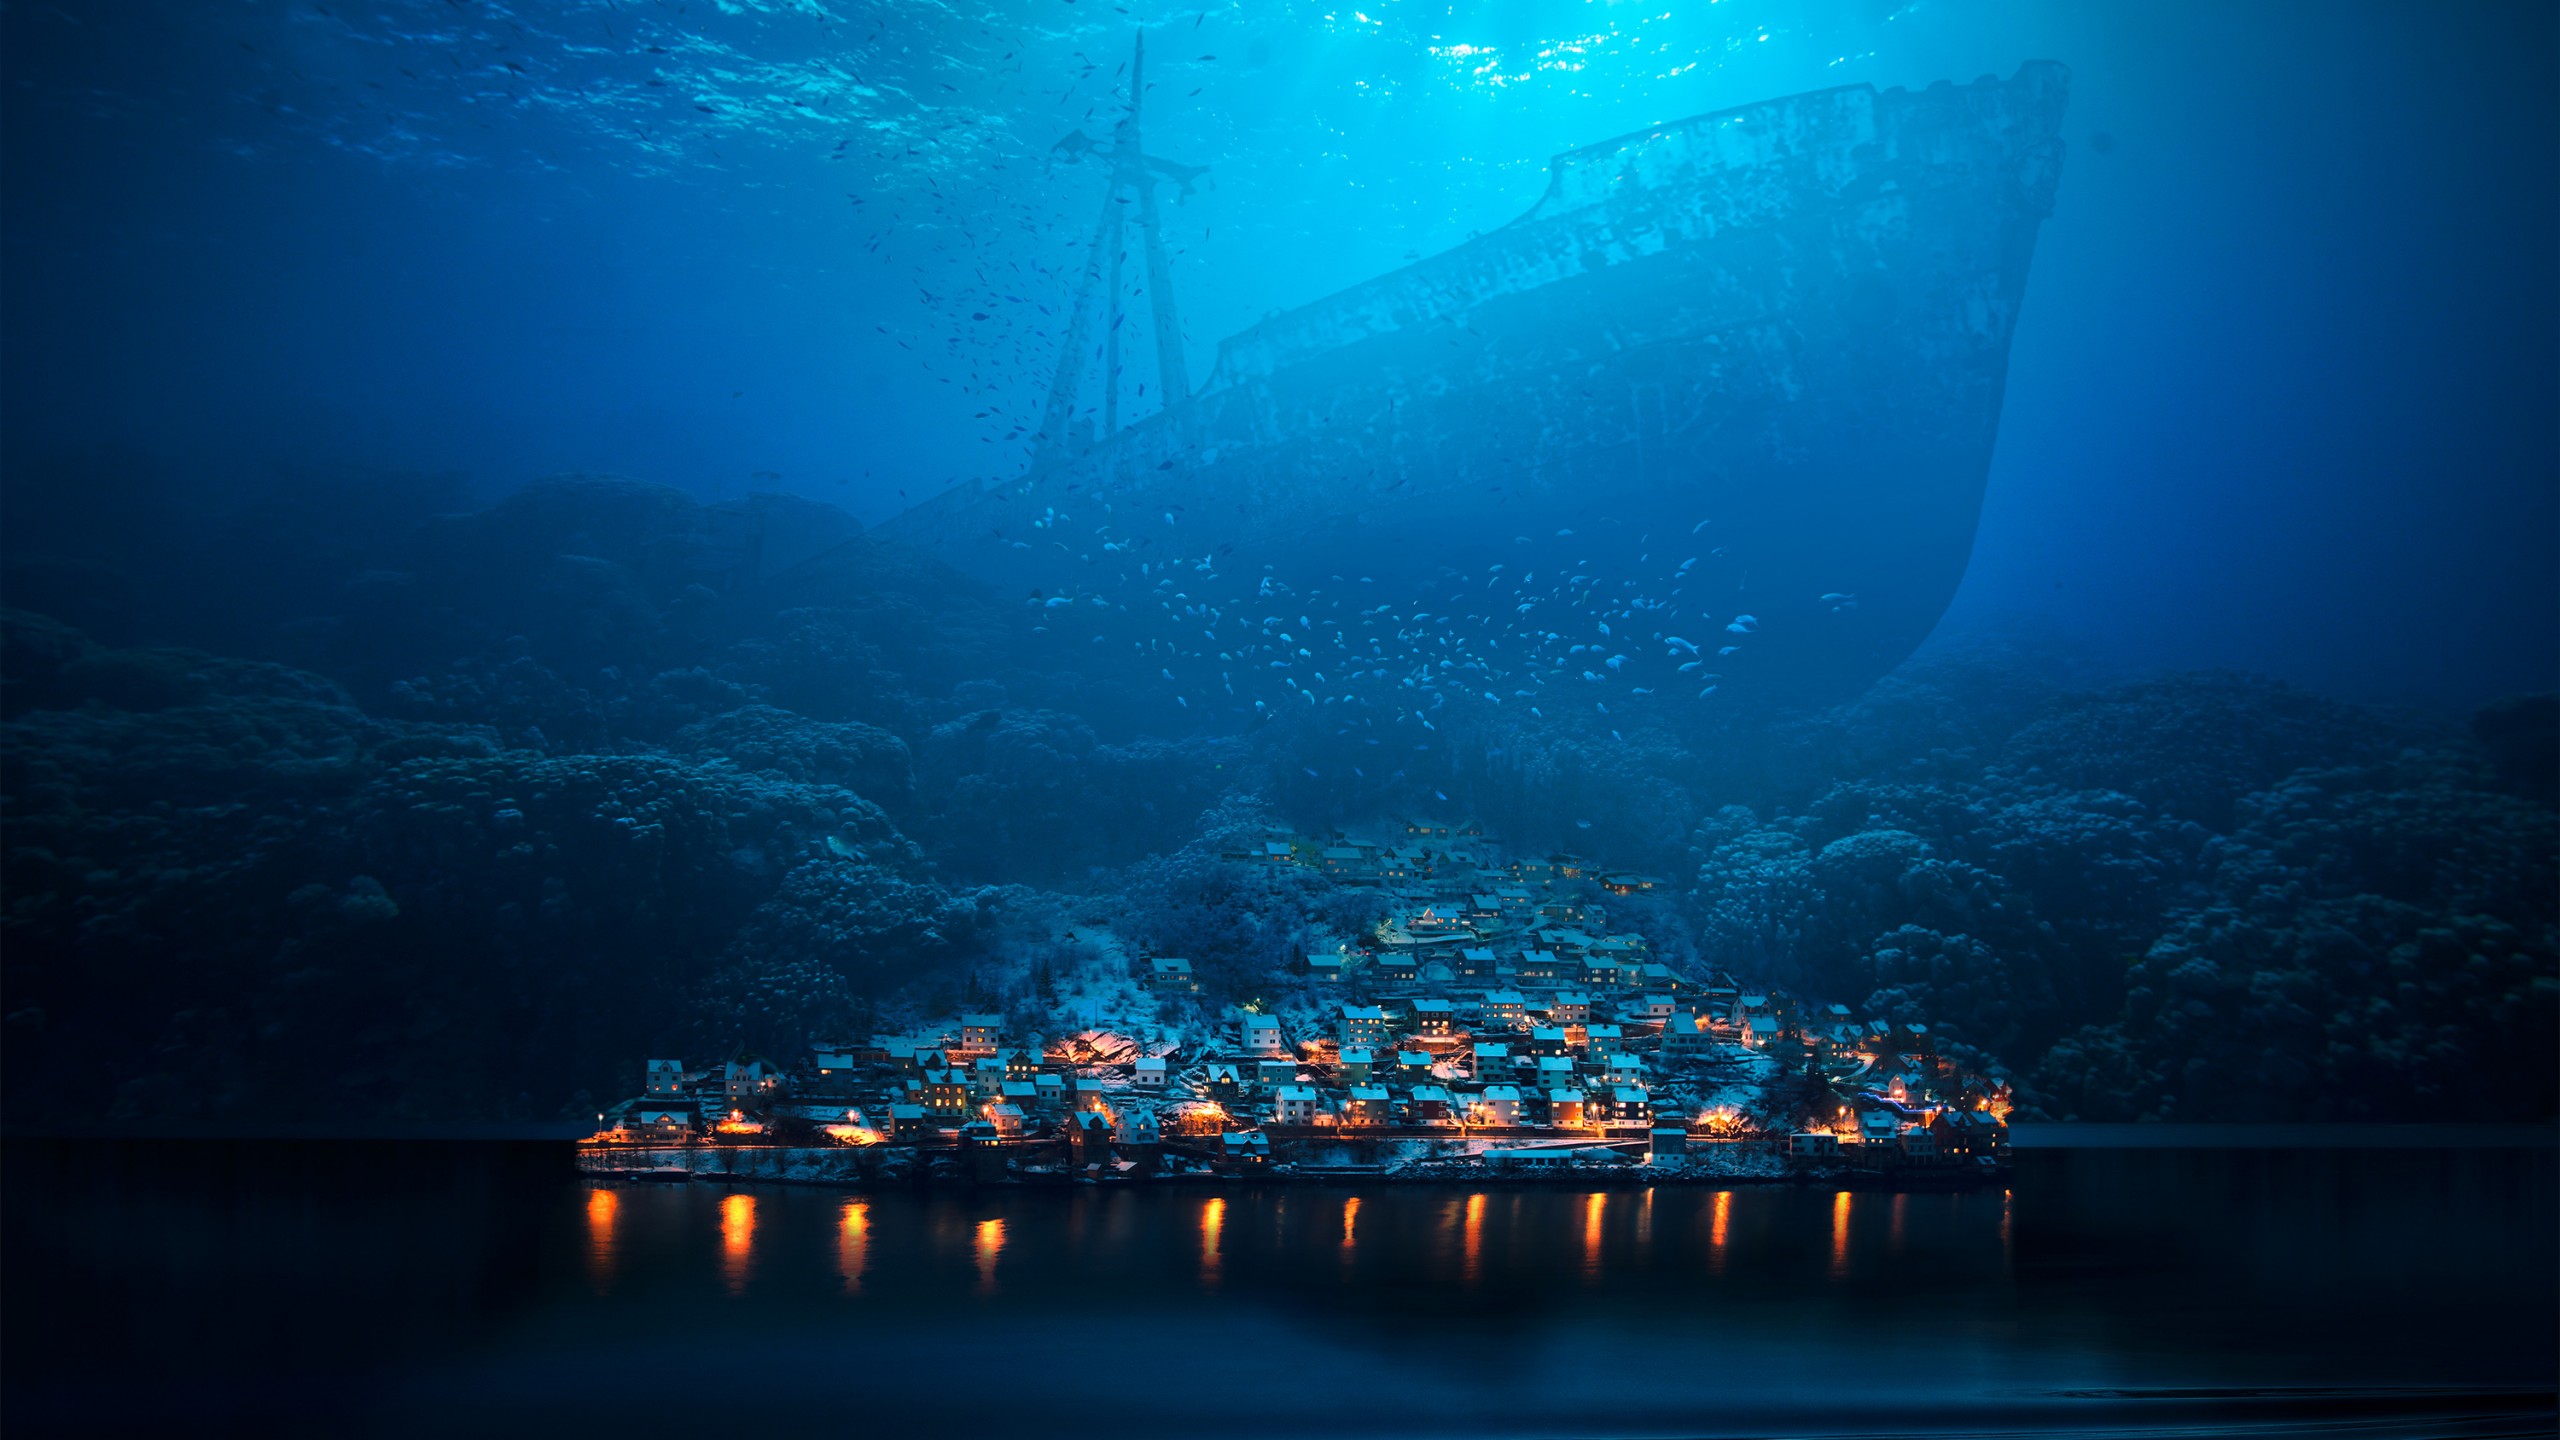 General 2560x1440 underwater ship shipwreck abyss fish sea town night fantasy art photo manipulation surreal blue cyan turquoise